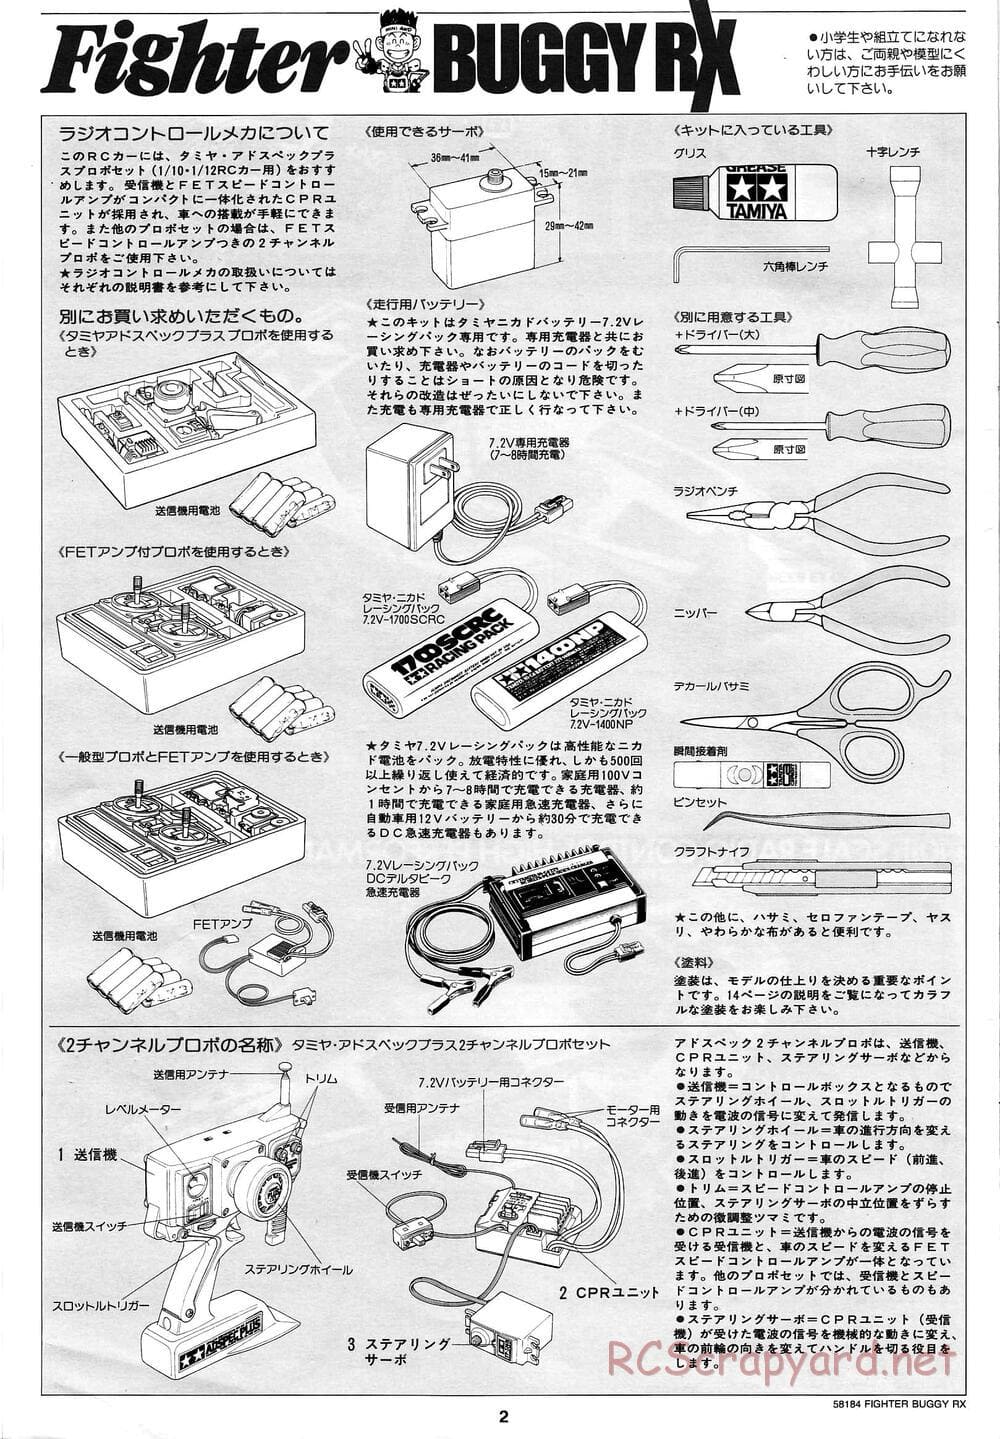 Tamiya - Fighter Buggy RX Chassis - Manual - Page 2